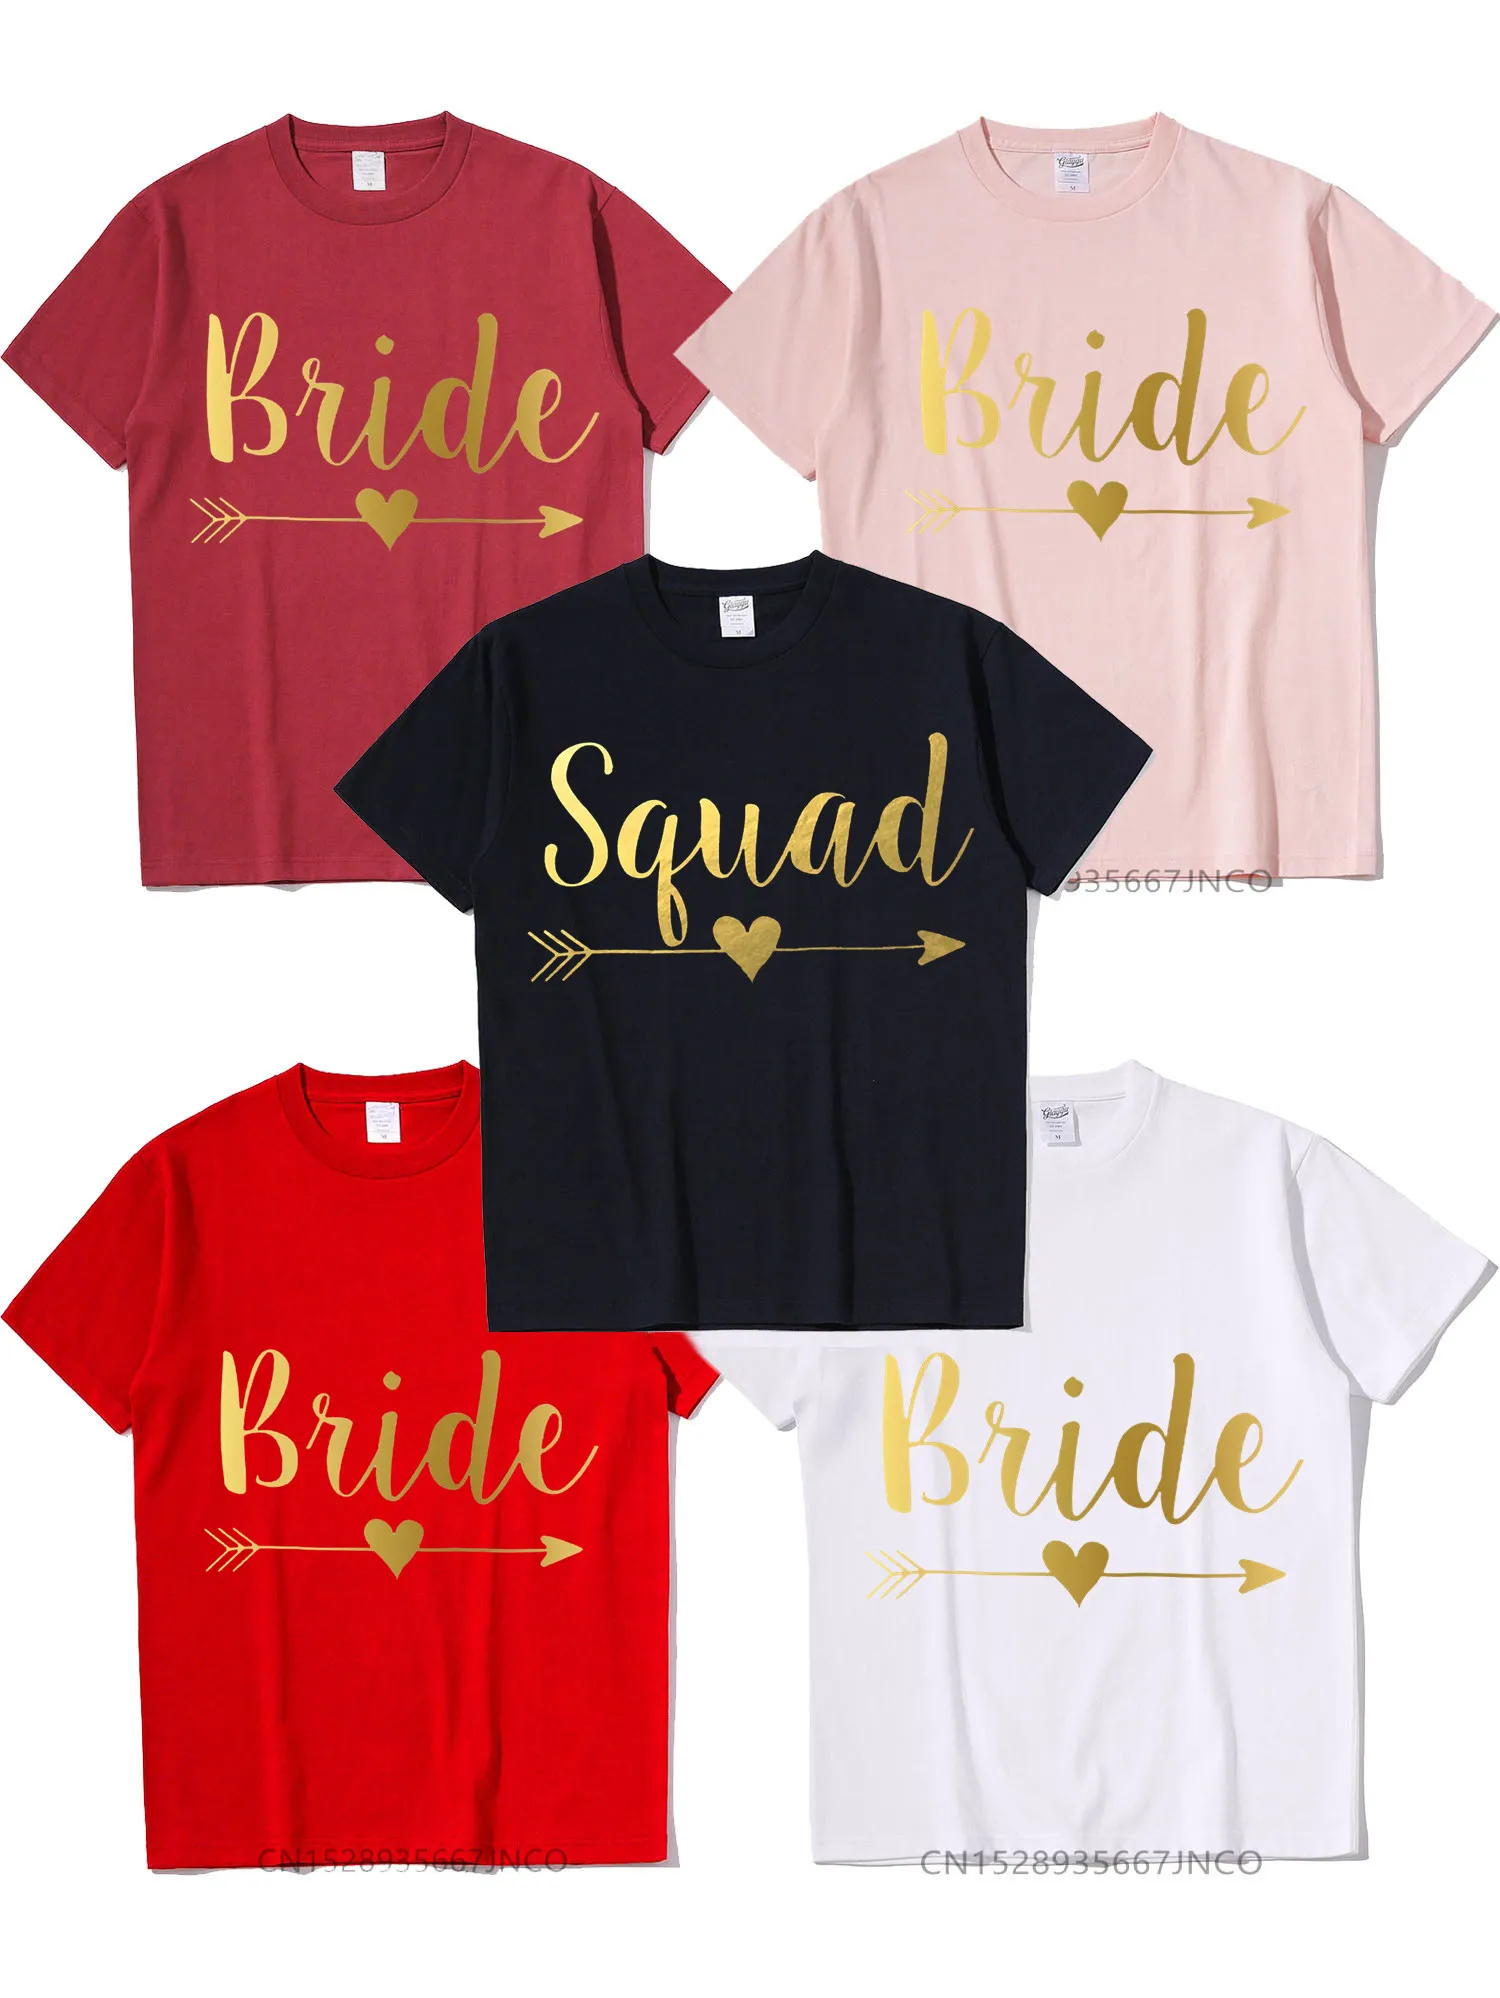 

Squad 100% Cotton Femme Bridesmaid EVJF Tee Shirt Girl Party Couple Matching Wedding Top Women Team To Be Bride Clothes